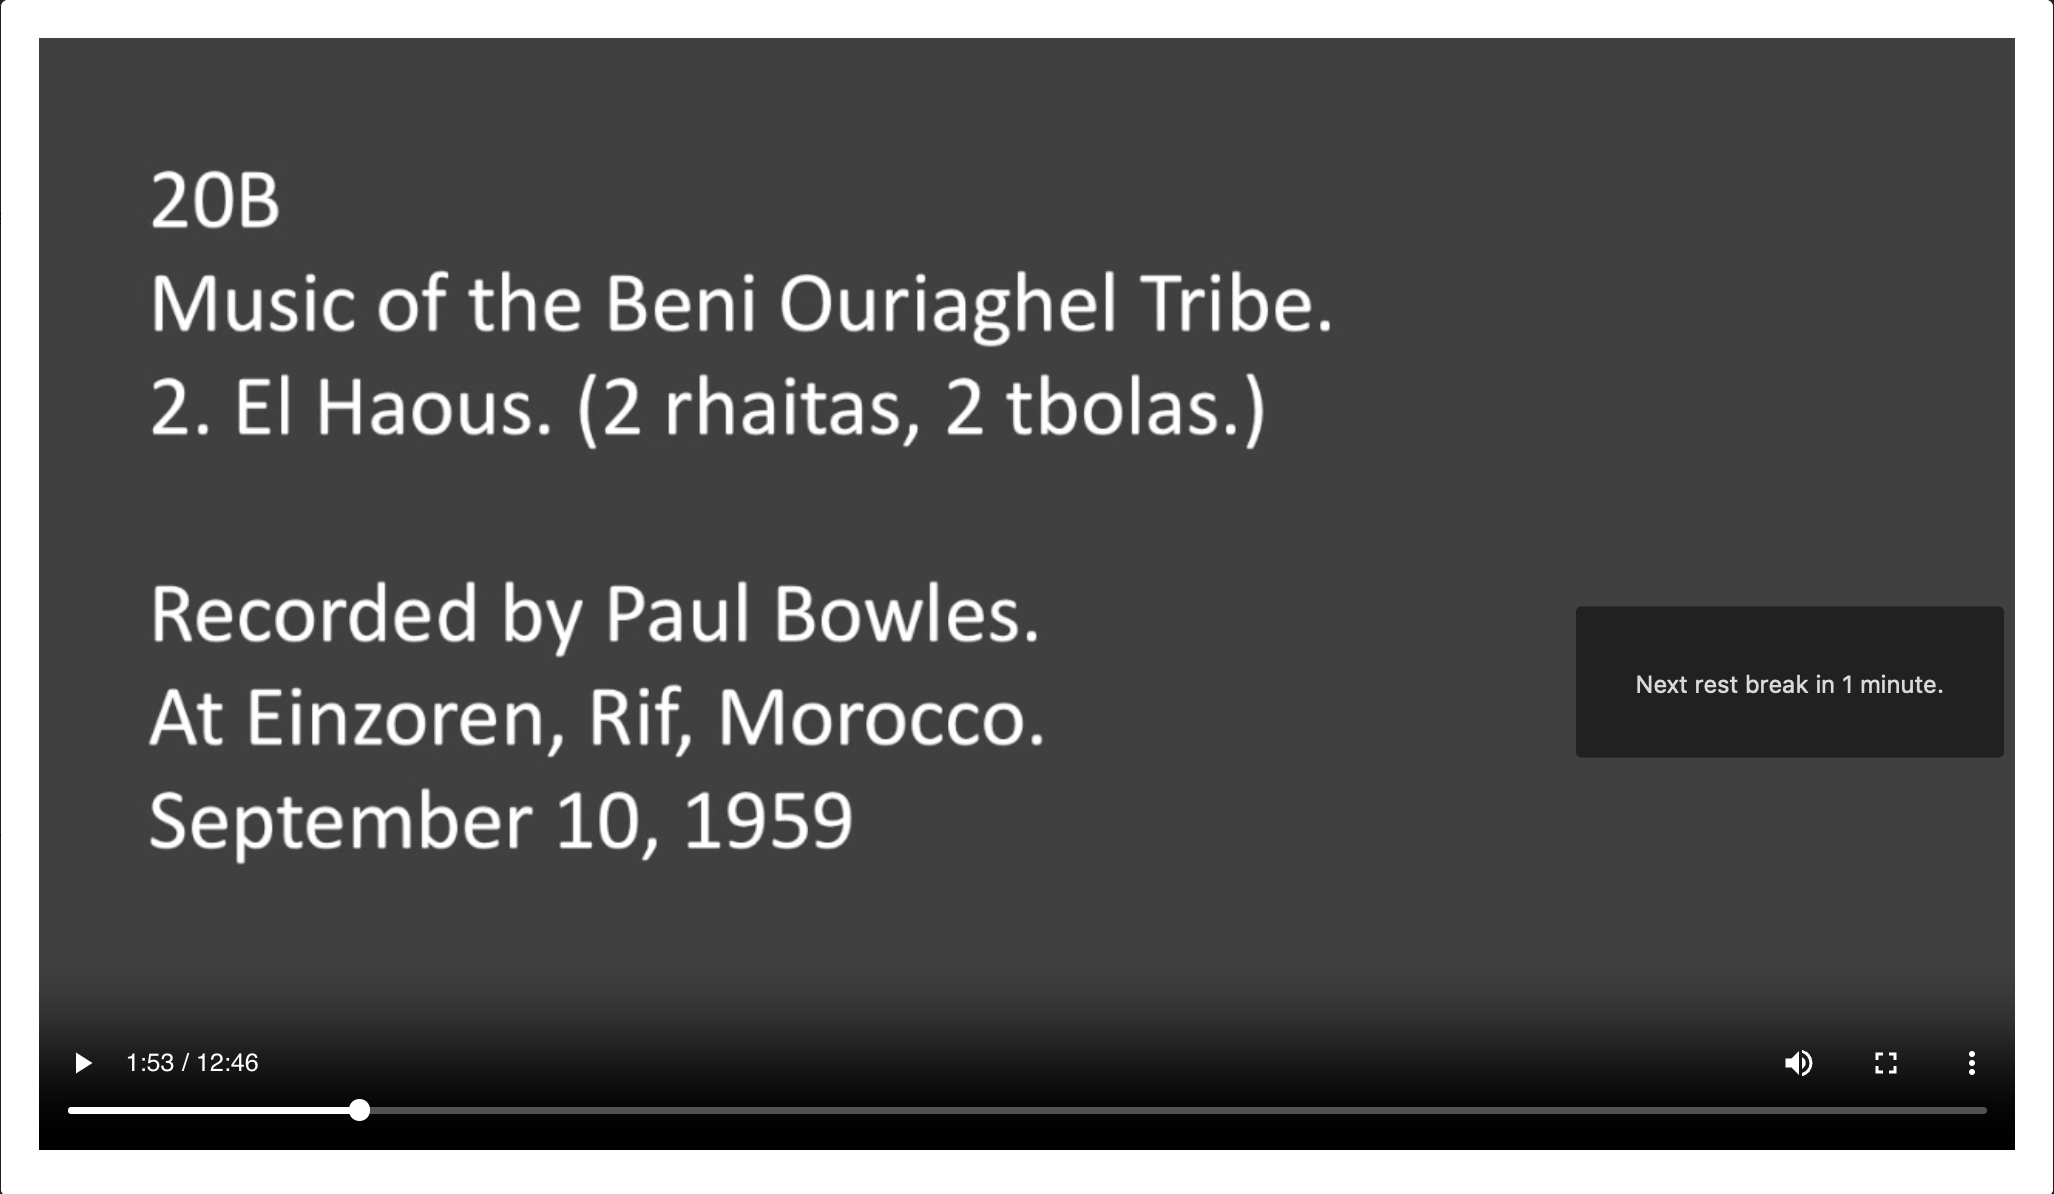 <p>20B 2 - El Haous. (2 rhaitas, 2 tbolas.) Music of the Beni Ouriaghel Tribe. Recorded by Paul Bowles. At Einzoren, Rif, Morocco. September 10, 1959</p>